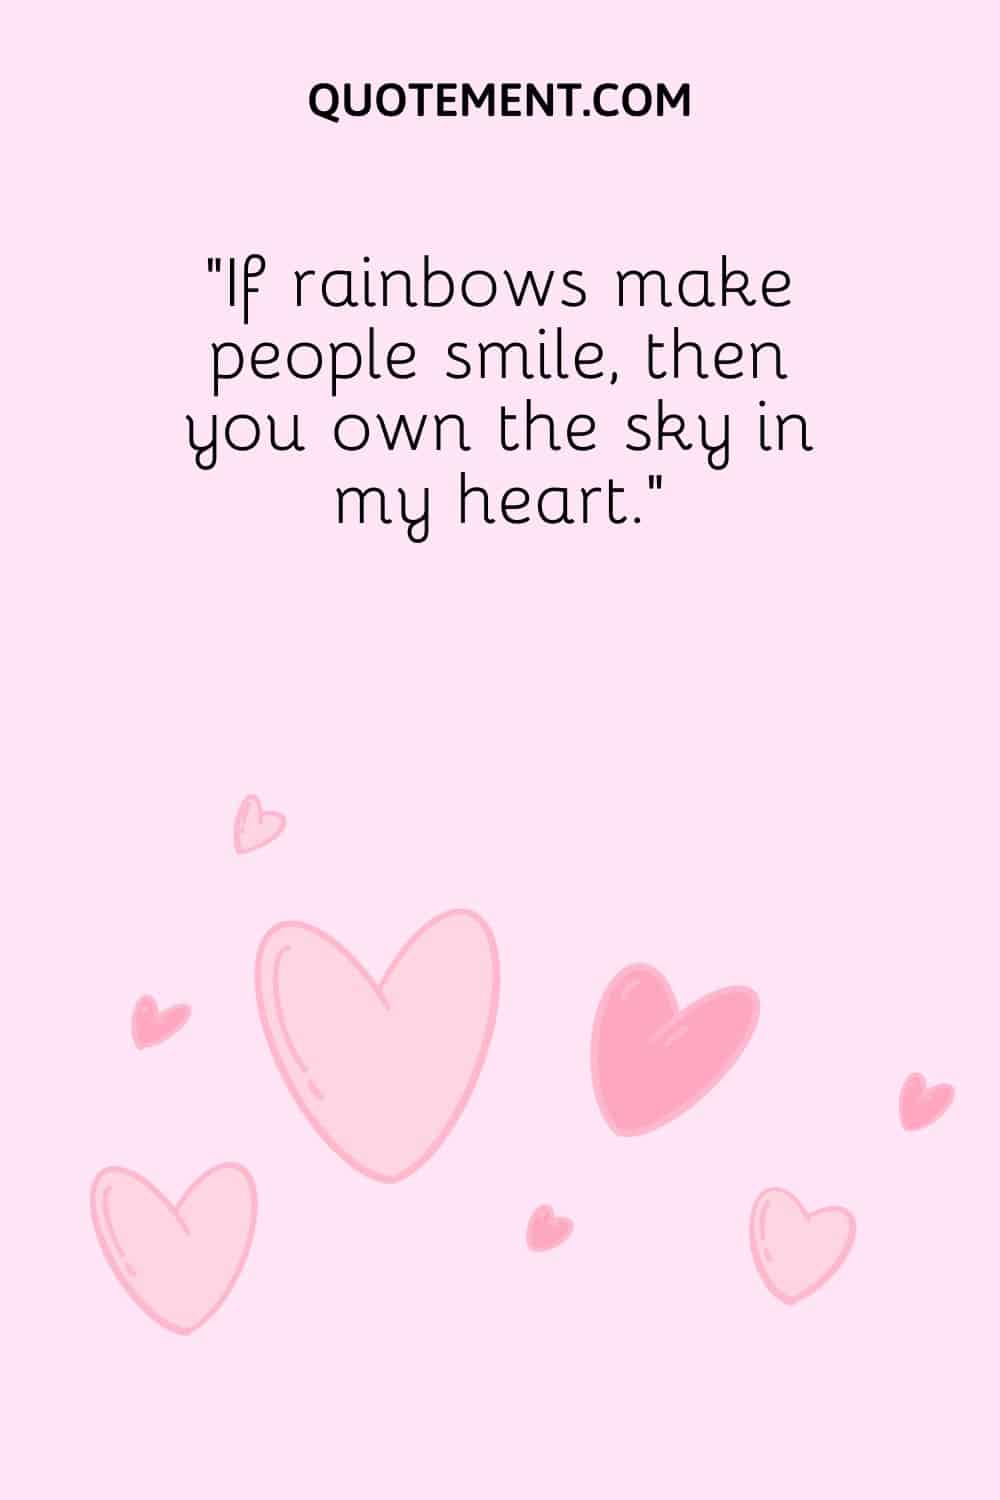 “If rainbows make people smile, then you own the sky in my heart.”